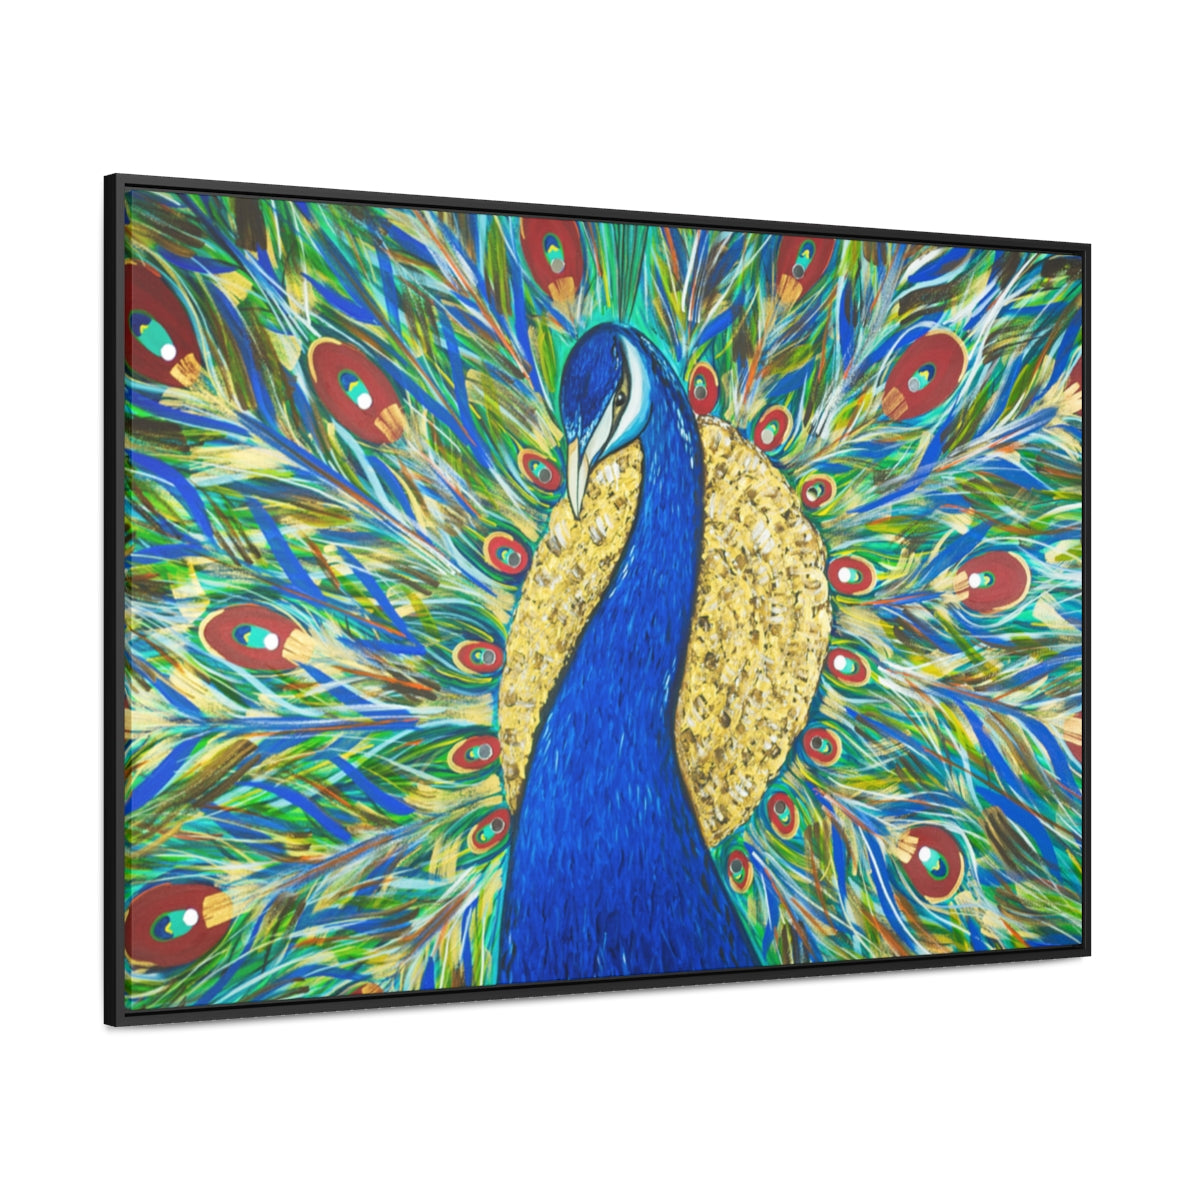 Peacock Reflections Horizontal Framed Gallery Wrapped Canvas Art Print